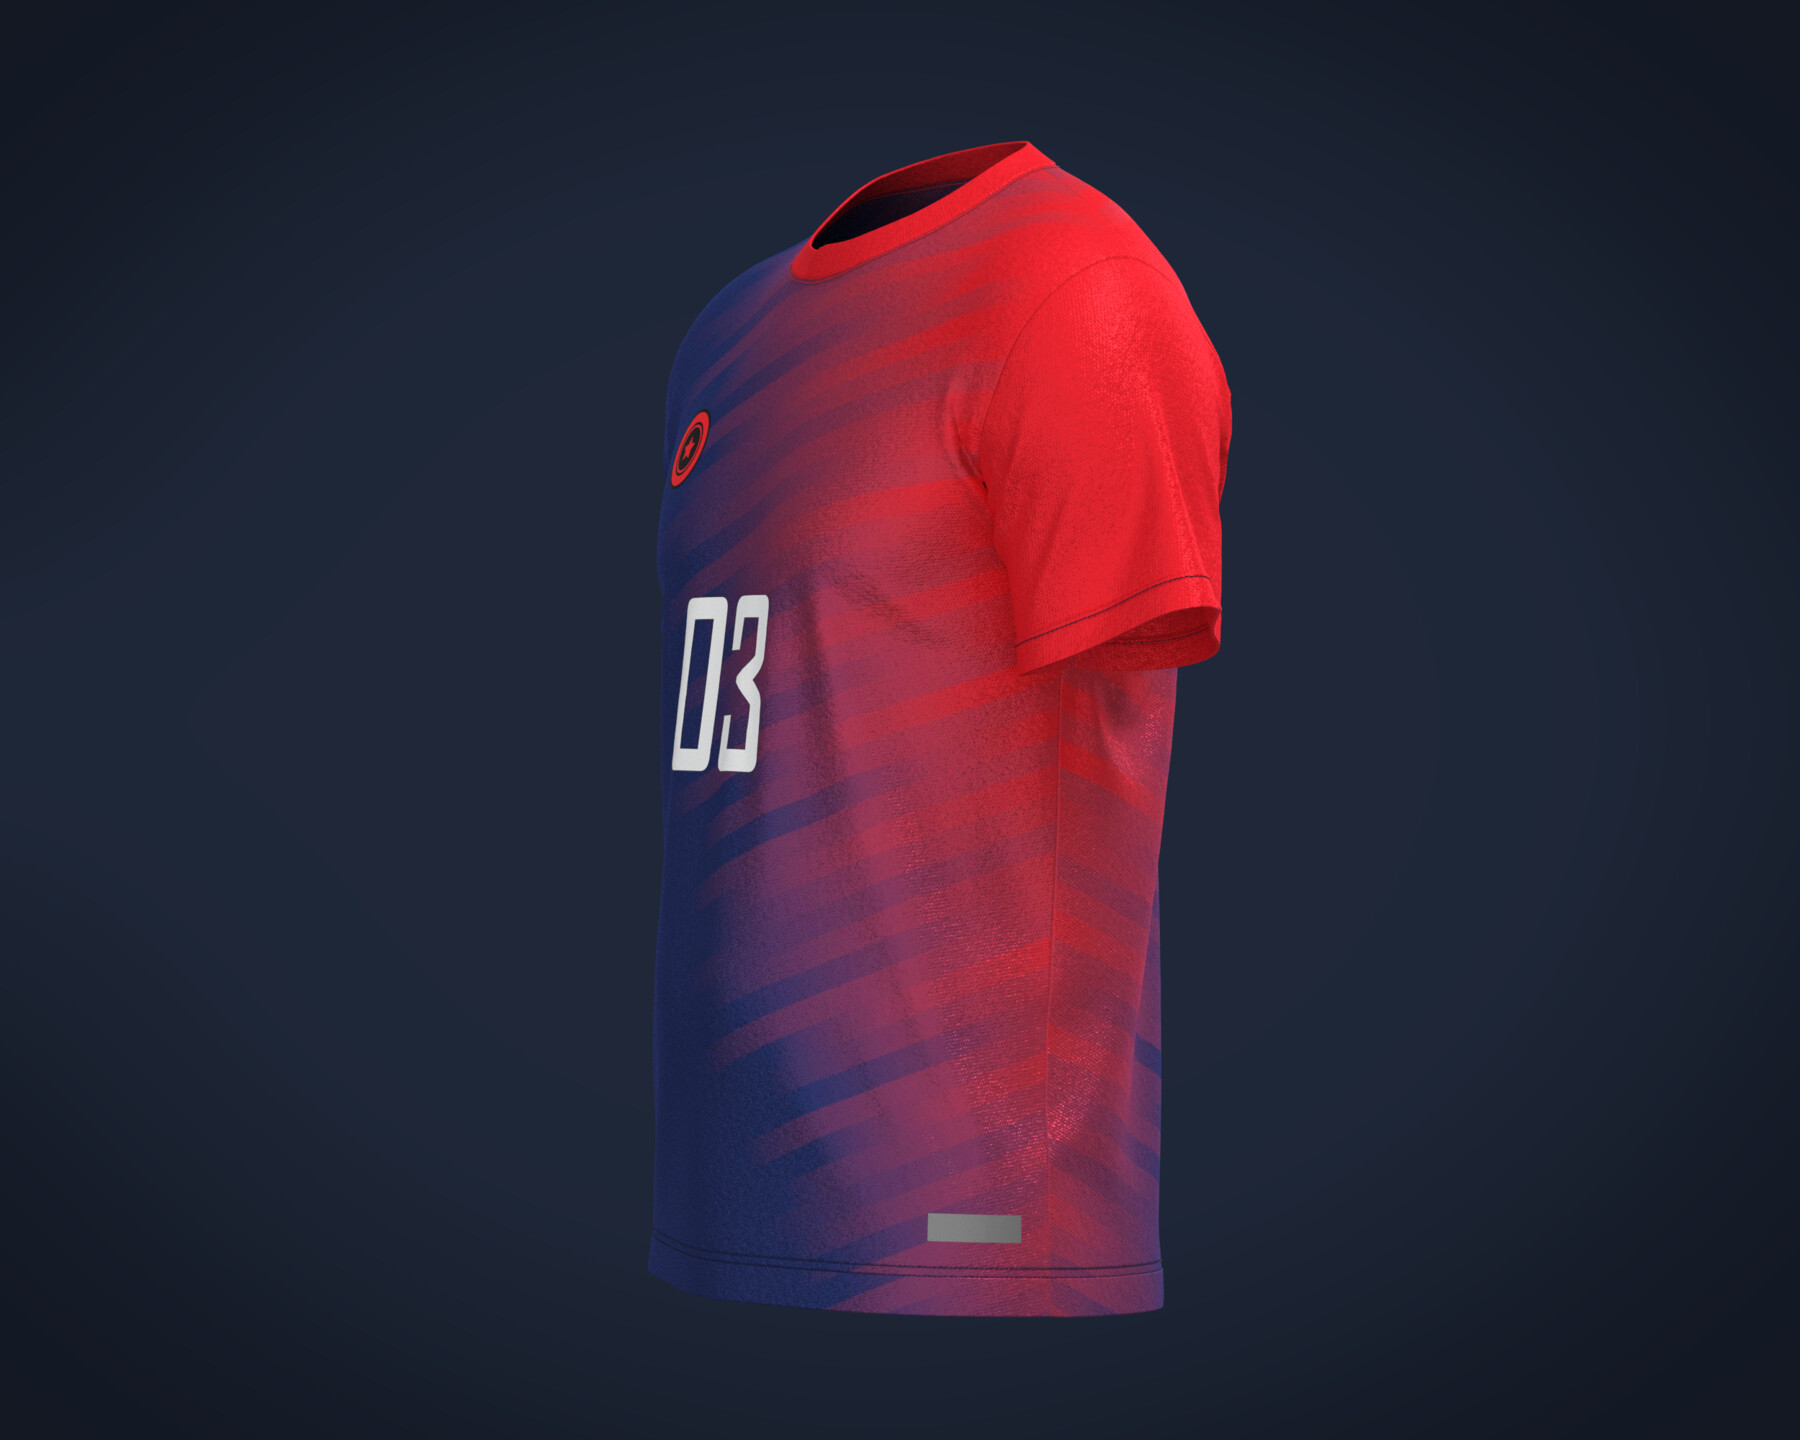 Soccer Red & Blue Jersey Player-03